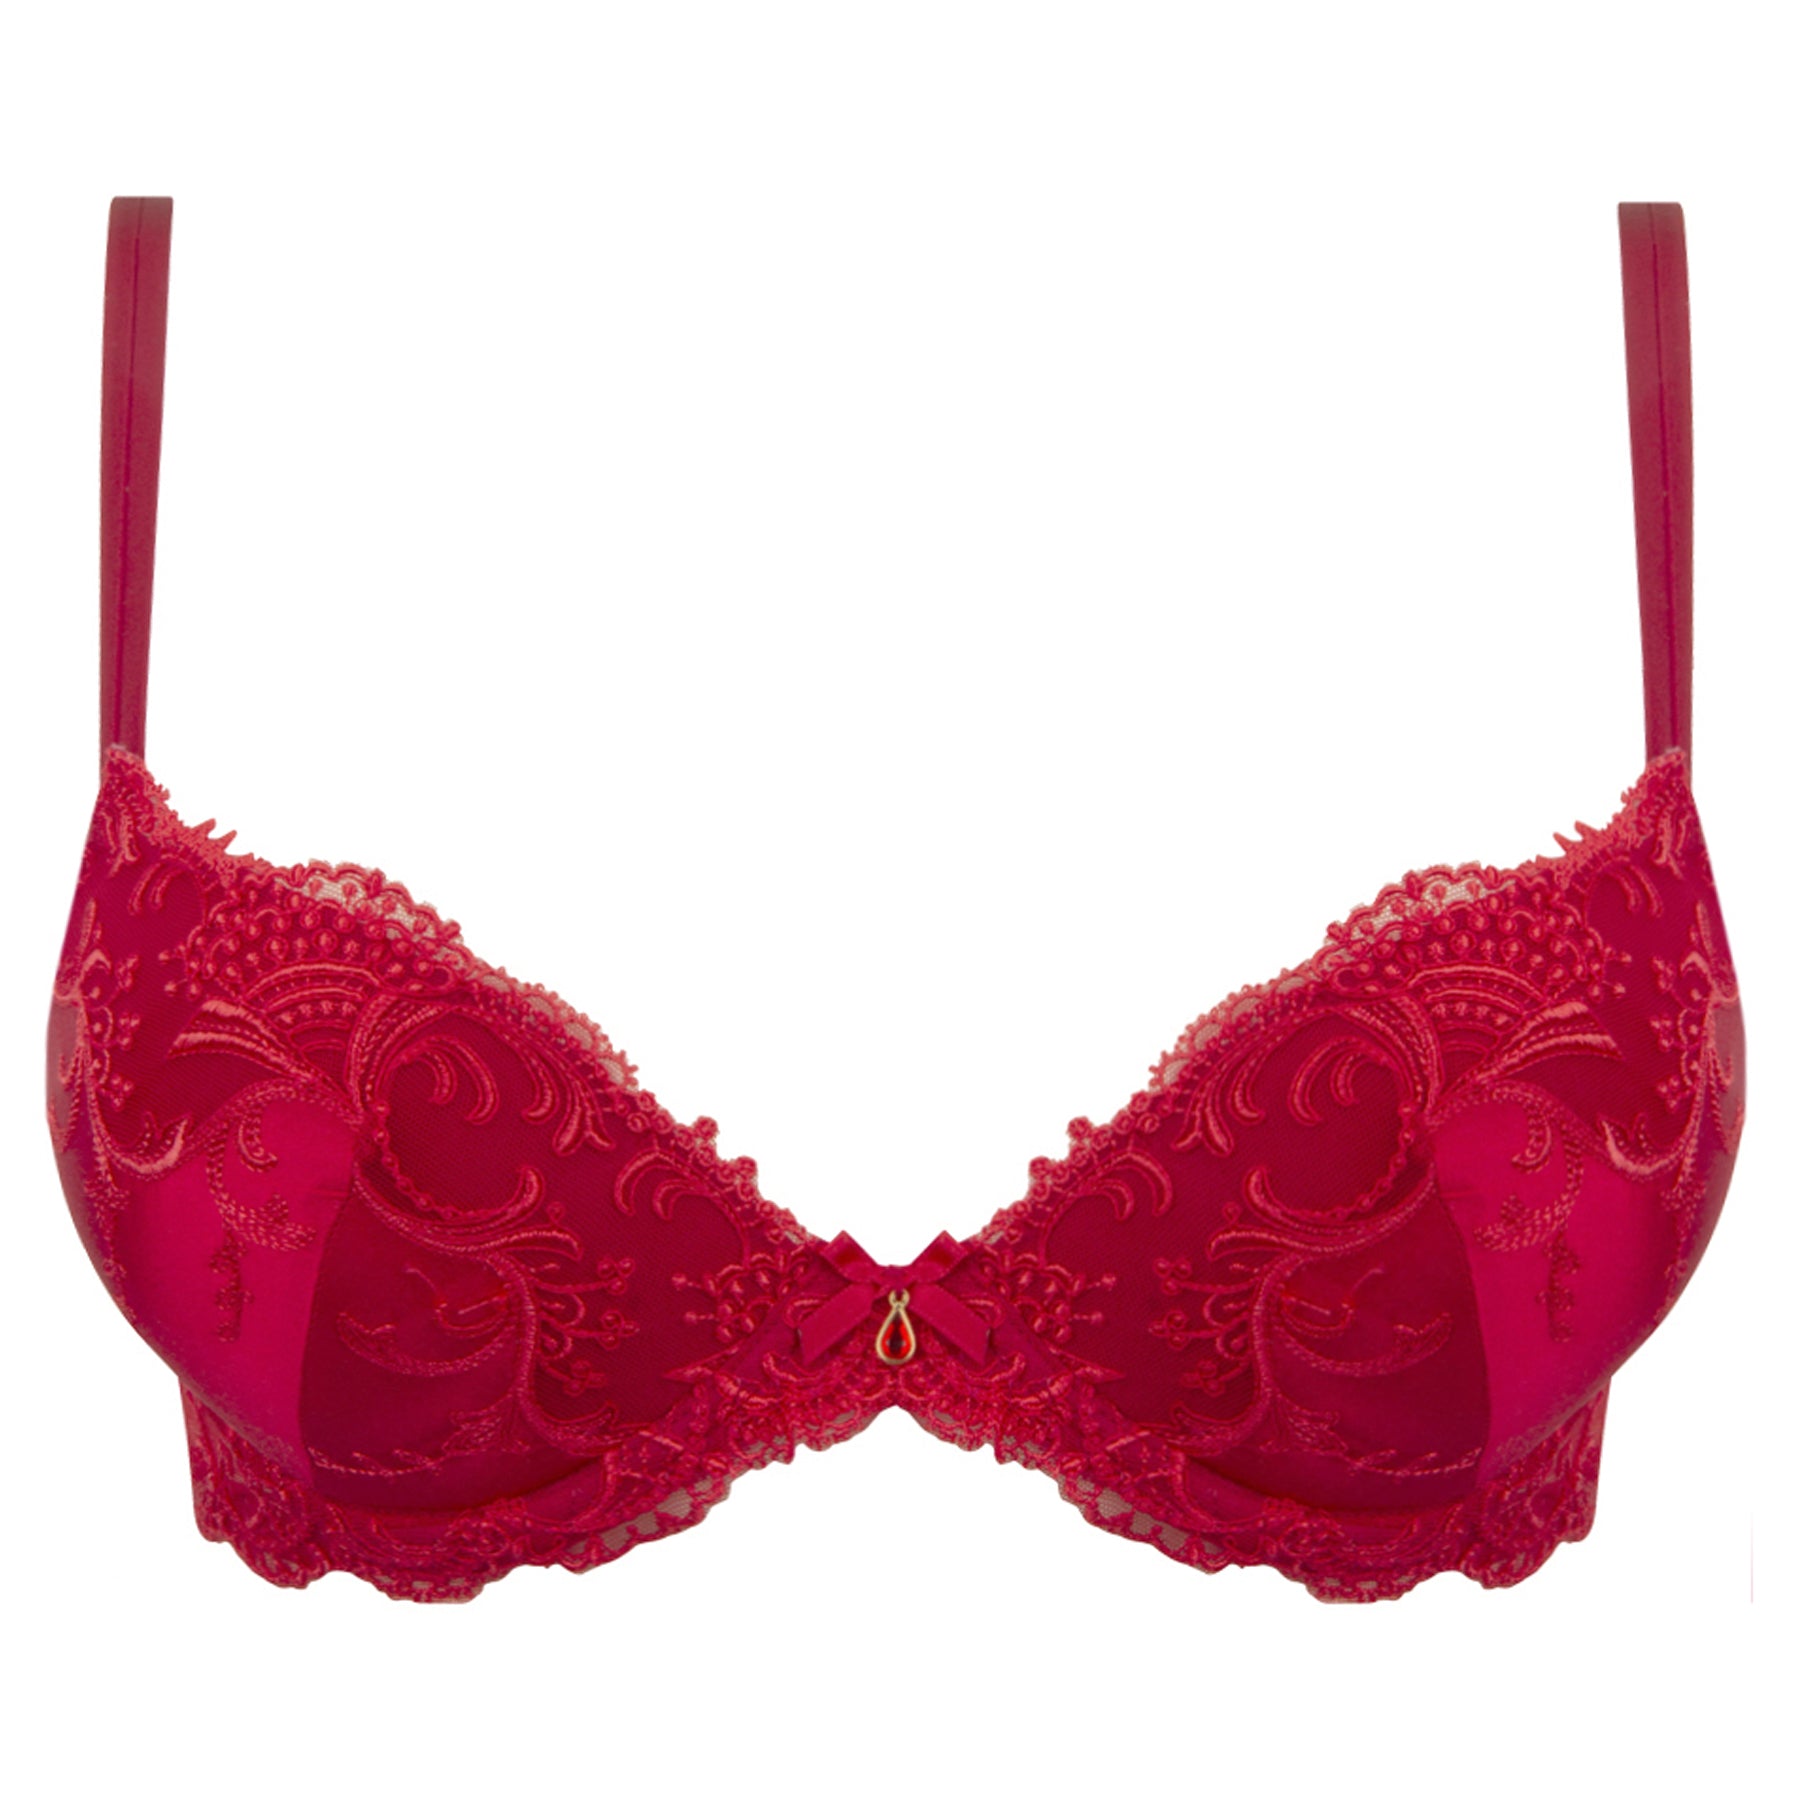 Buy Silk Bra With Transparent Lace Cups the Mae Bra is Handmade in